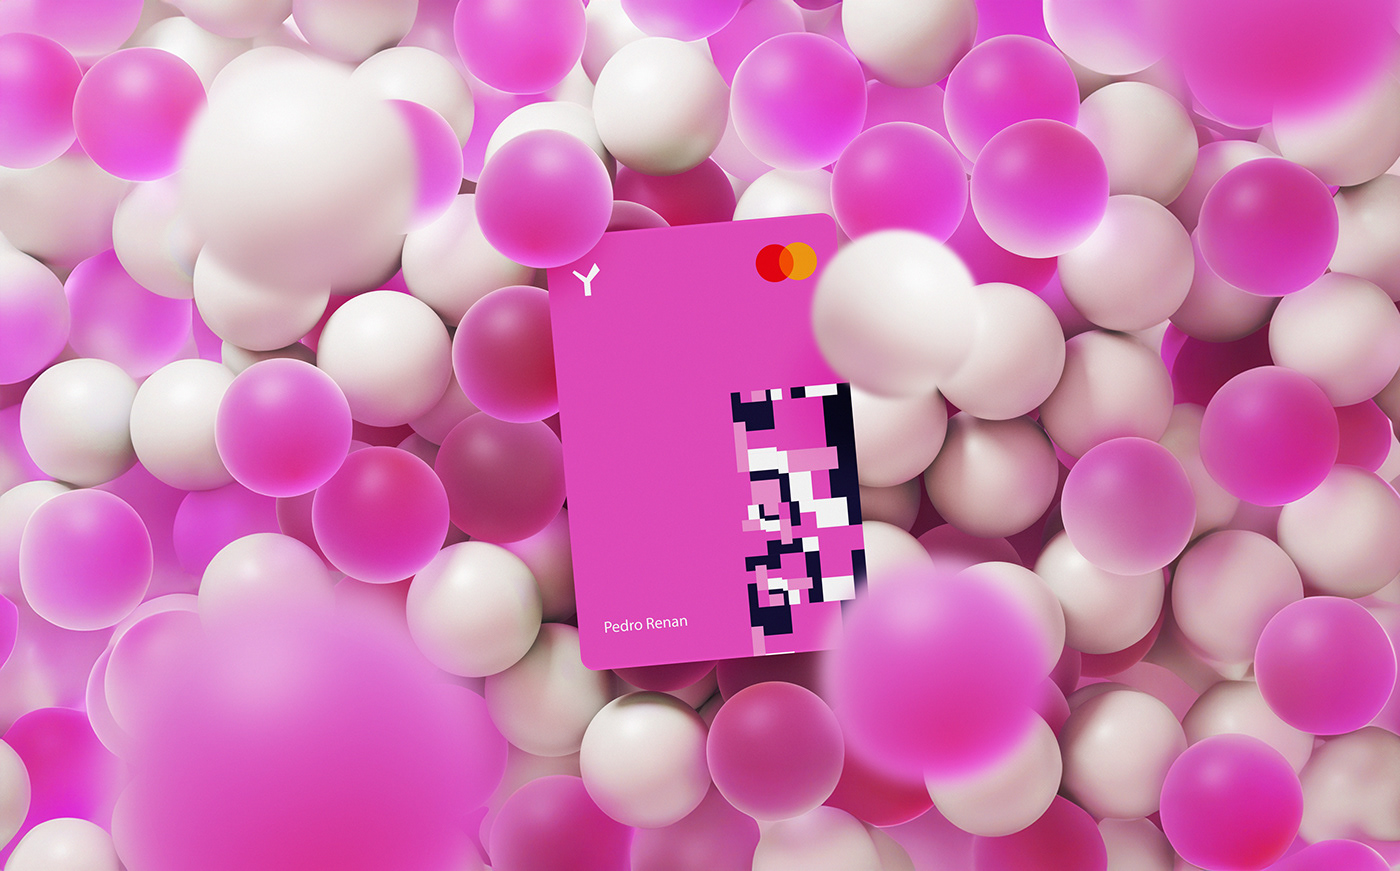 Yasbank's pink card amidst 3D spheres